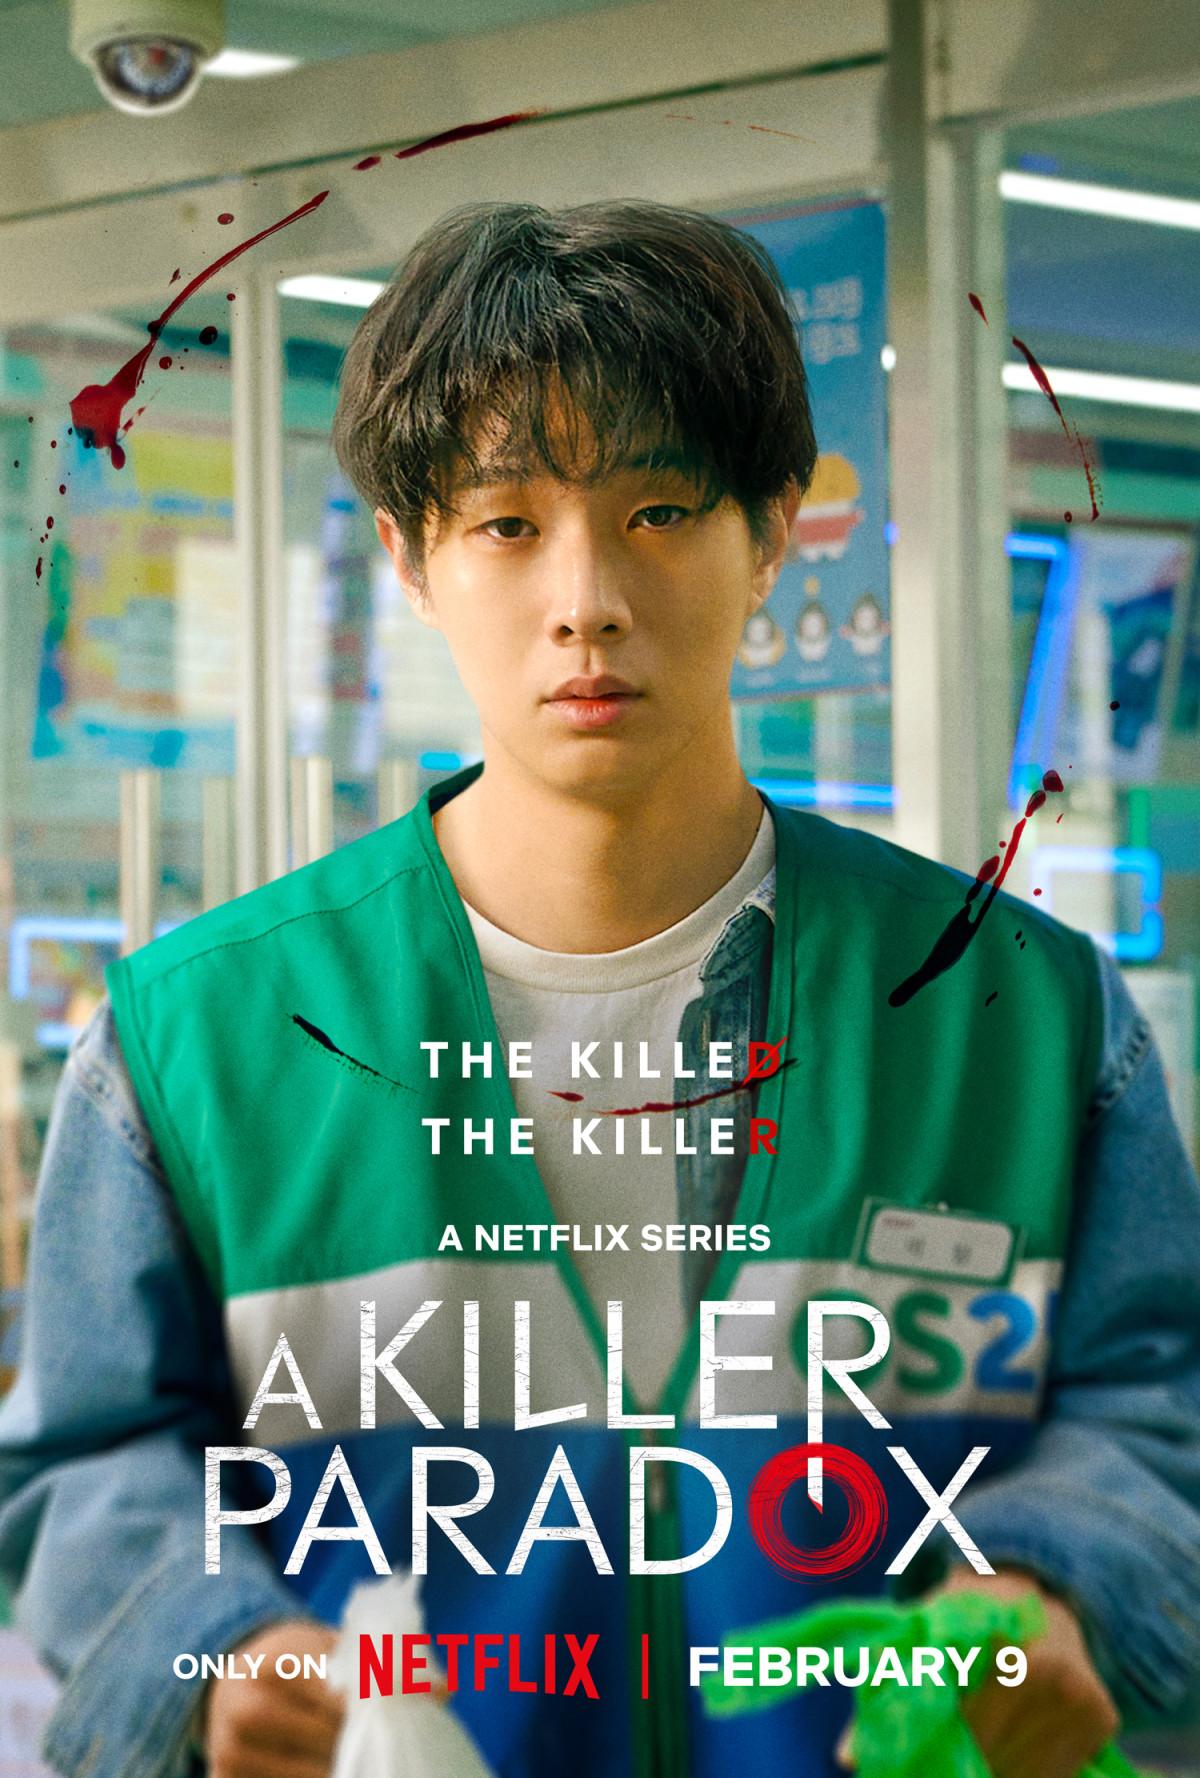 A Killer Paradox (February 9) - Streaming on NetflixA Killer Paradox explores the dark turn in an ordinary university student’s life when he accidentally kills a man who turns out to be a notorious serial killer. Lee Tang's unique ability to identify inherently evil individuals propels him on a dark path, leading to a tense investigation by a detective.